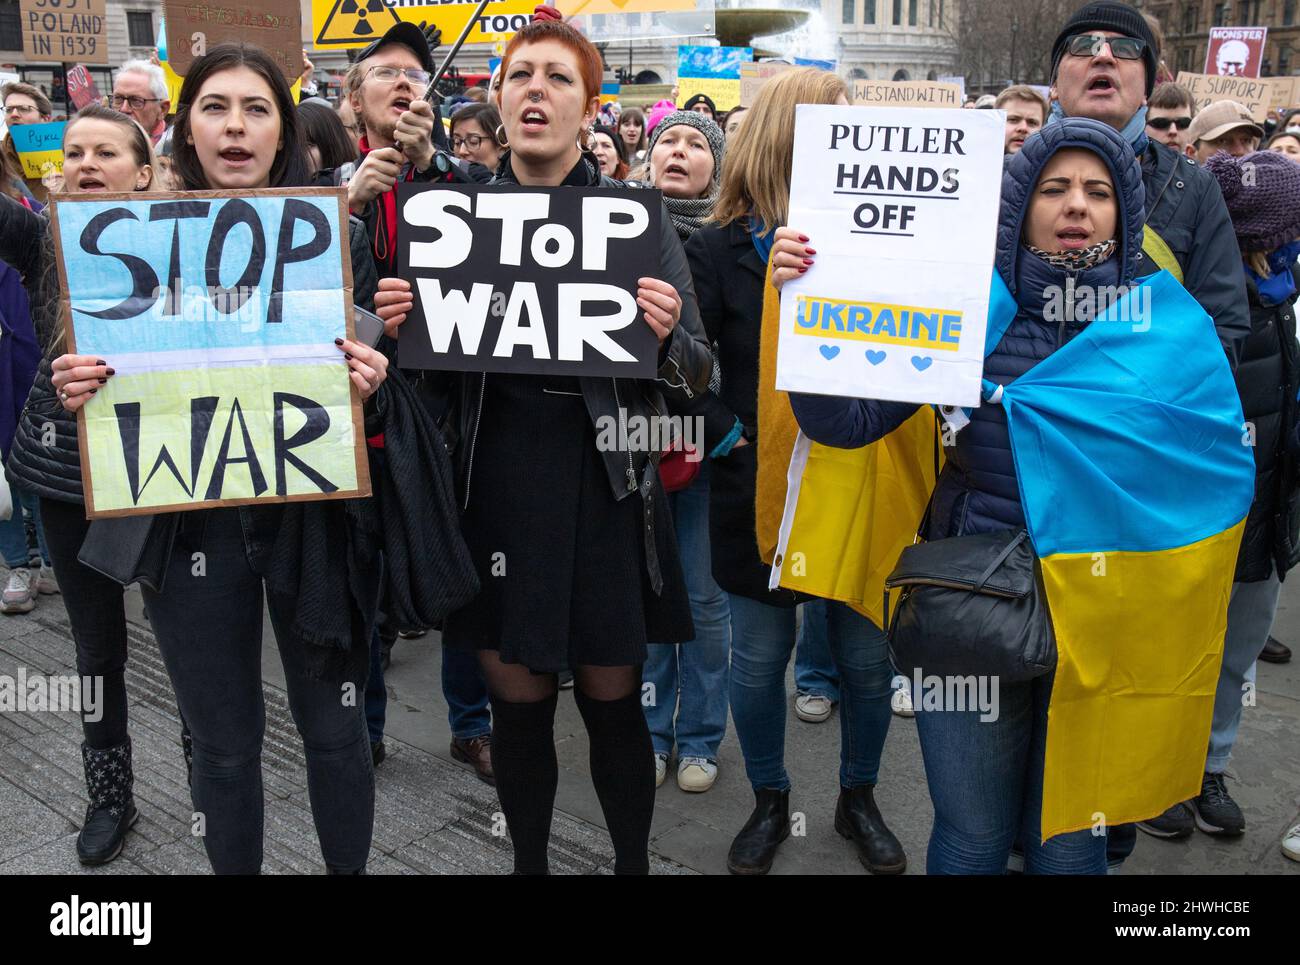 London, England, UK 5 March 2022 Around a thousand protesters gather in Trafalgar Square in solidarity with Ukraine and against Russia’s invasion of the country. Women and children hold banners, posters and placards with messages to Putin and Russia Credit: Denise Laura Baker/Alamy Live News Stock Photo